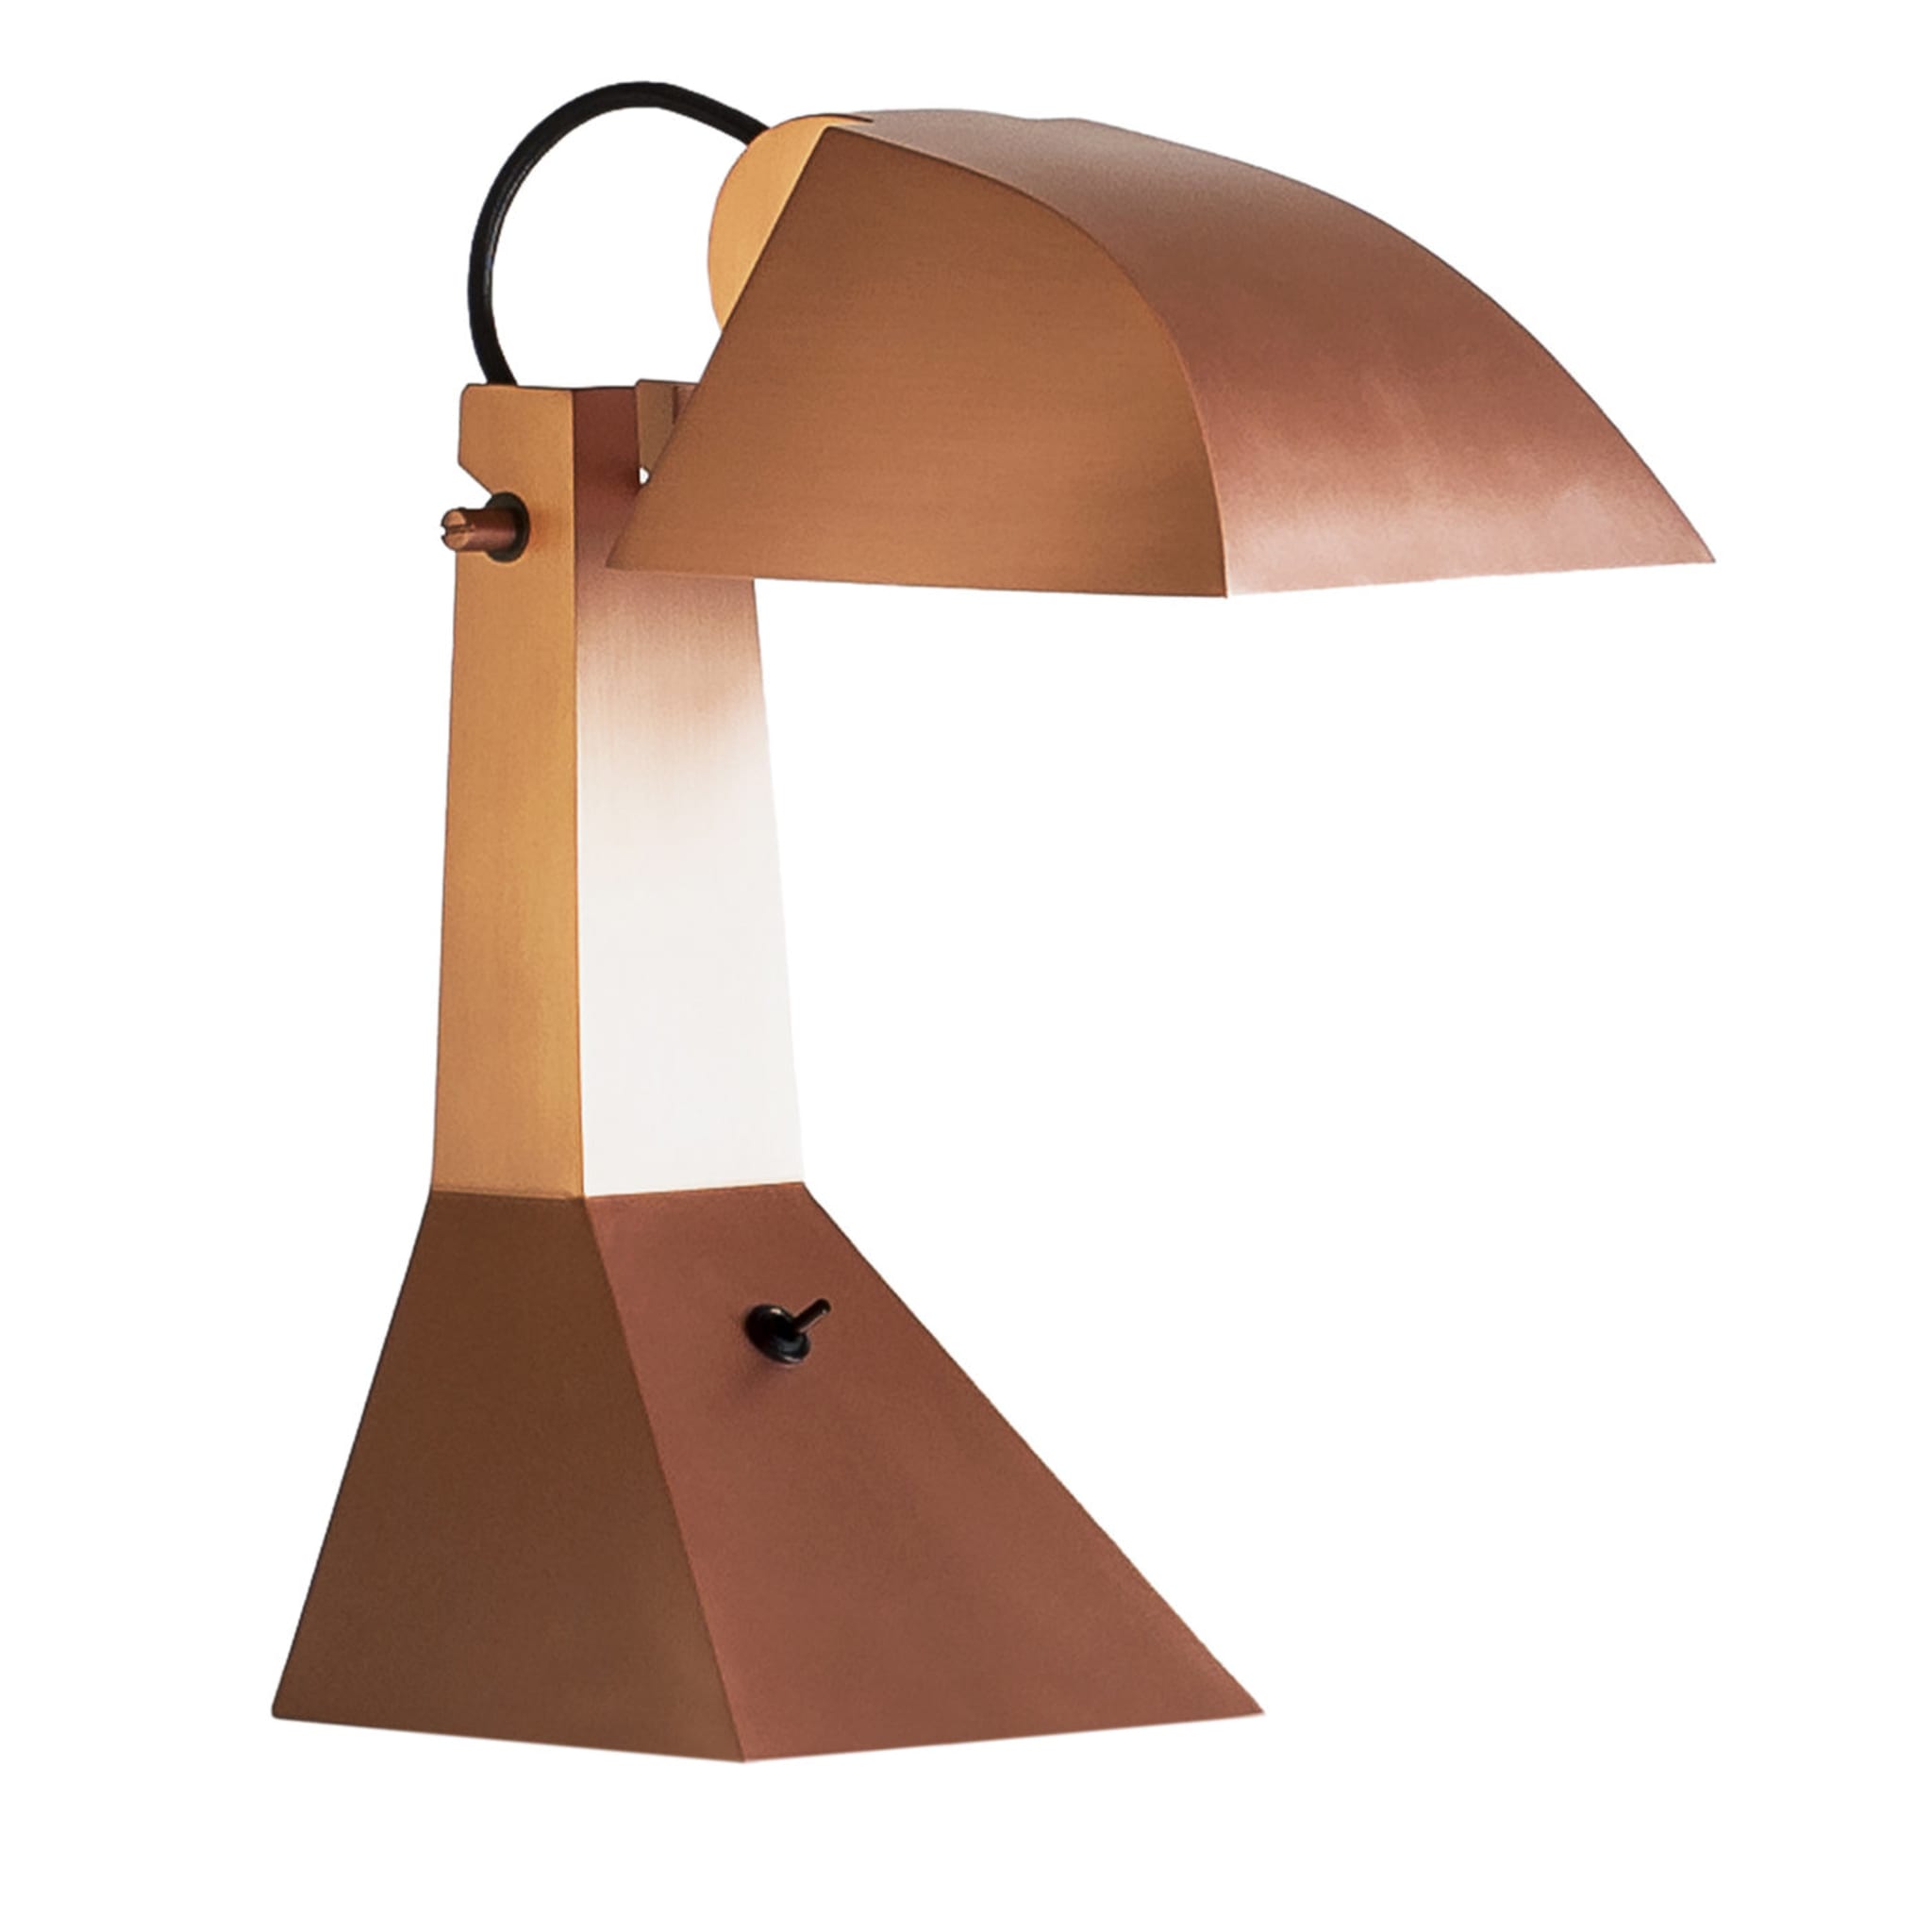 E63 Table Lamp by Umberto Riva #2 - Main view